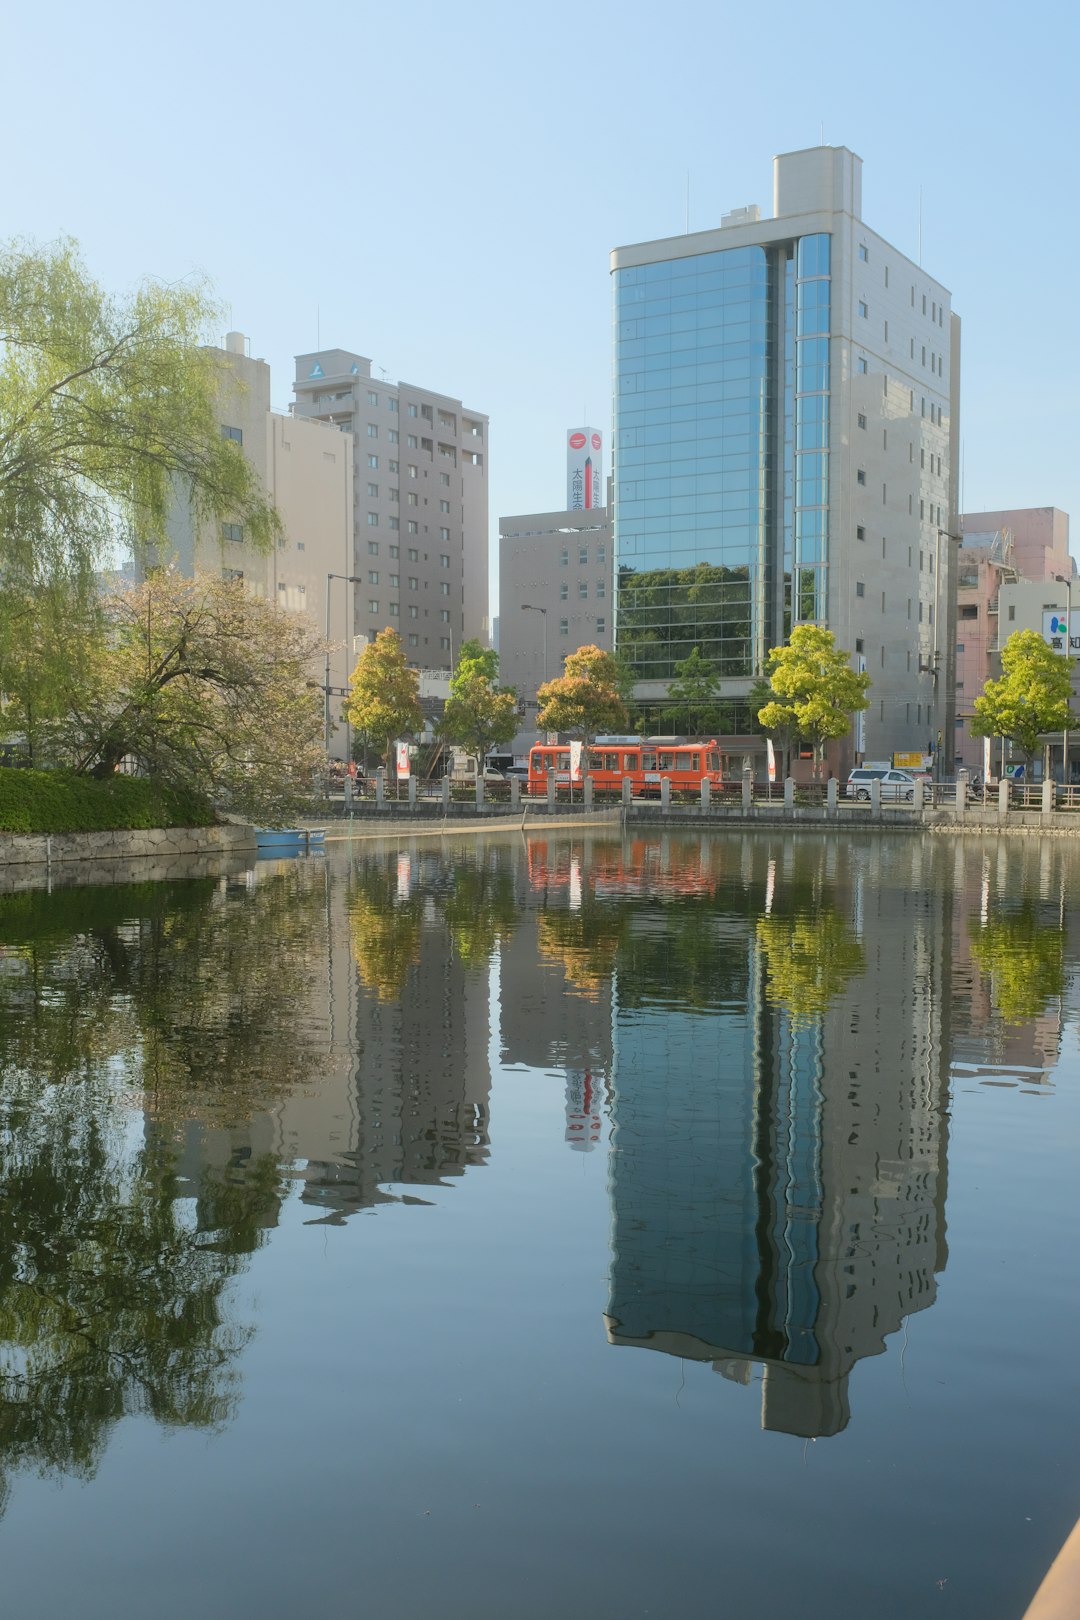 body of water near trees and high rise buildings during daytime